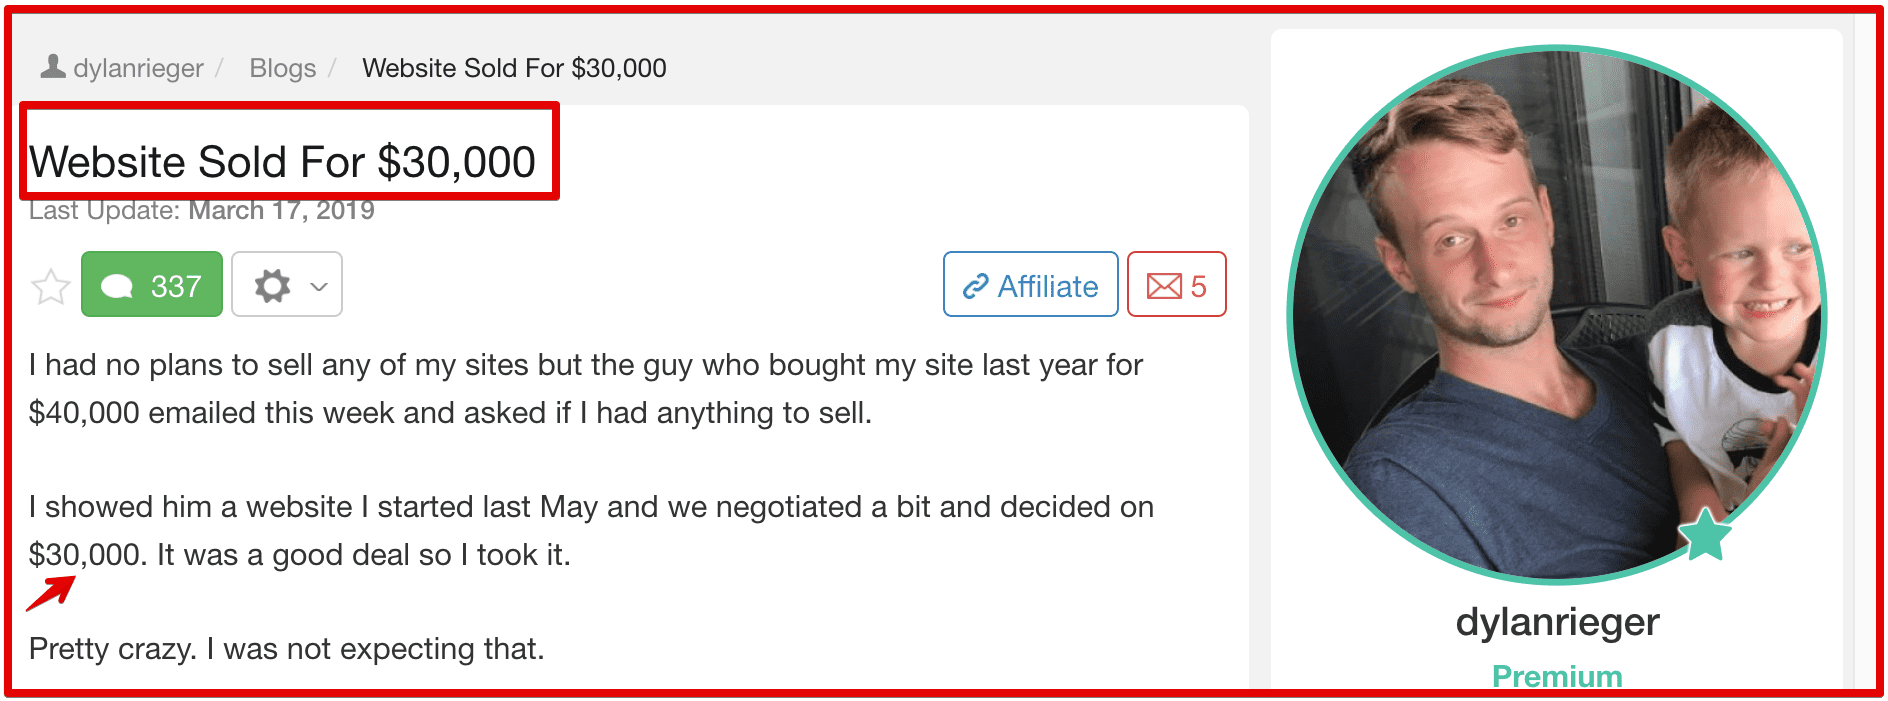 Wealthy Affiliate review  - Dylan Success story on Wealthy Affiliate